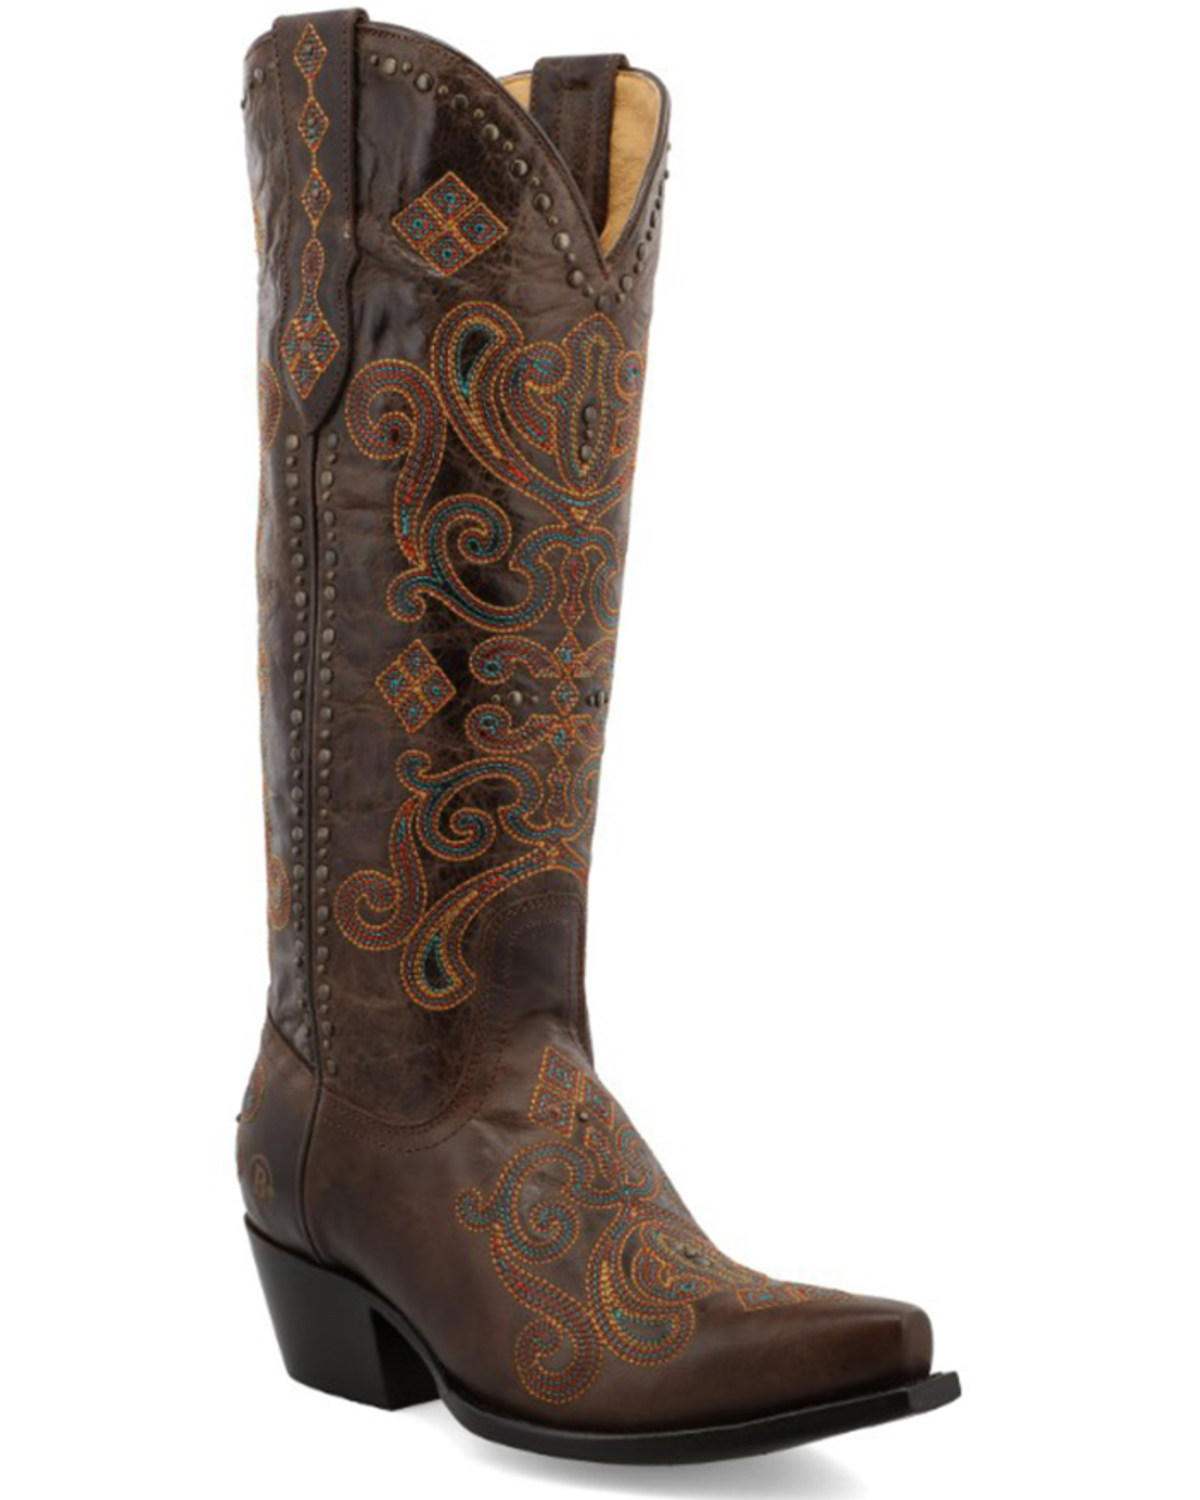 Black Star Women's Lockhart Embroidered Leather Western Boot - Snip Toe